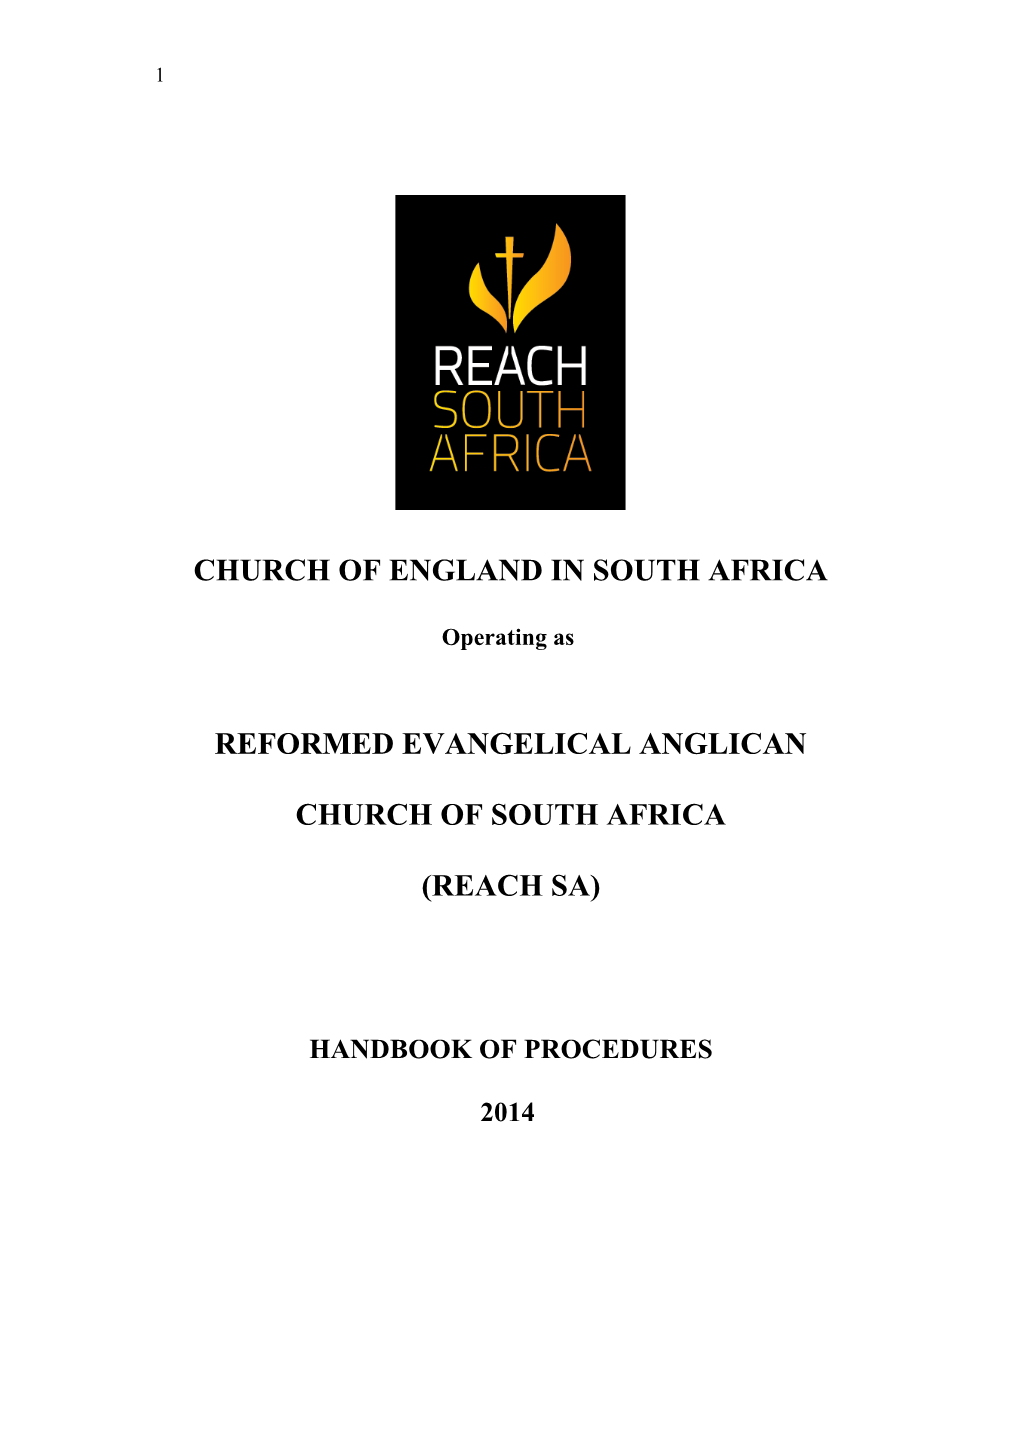 Church of England in South Africa